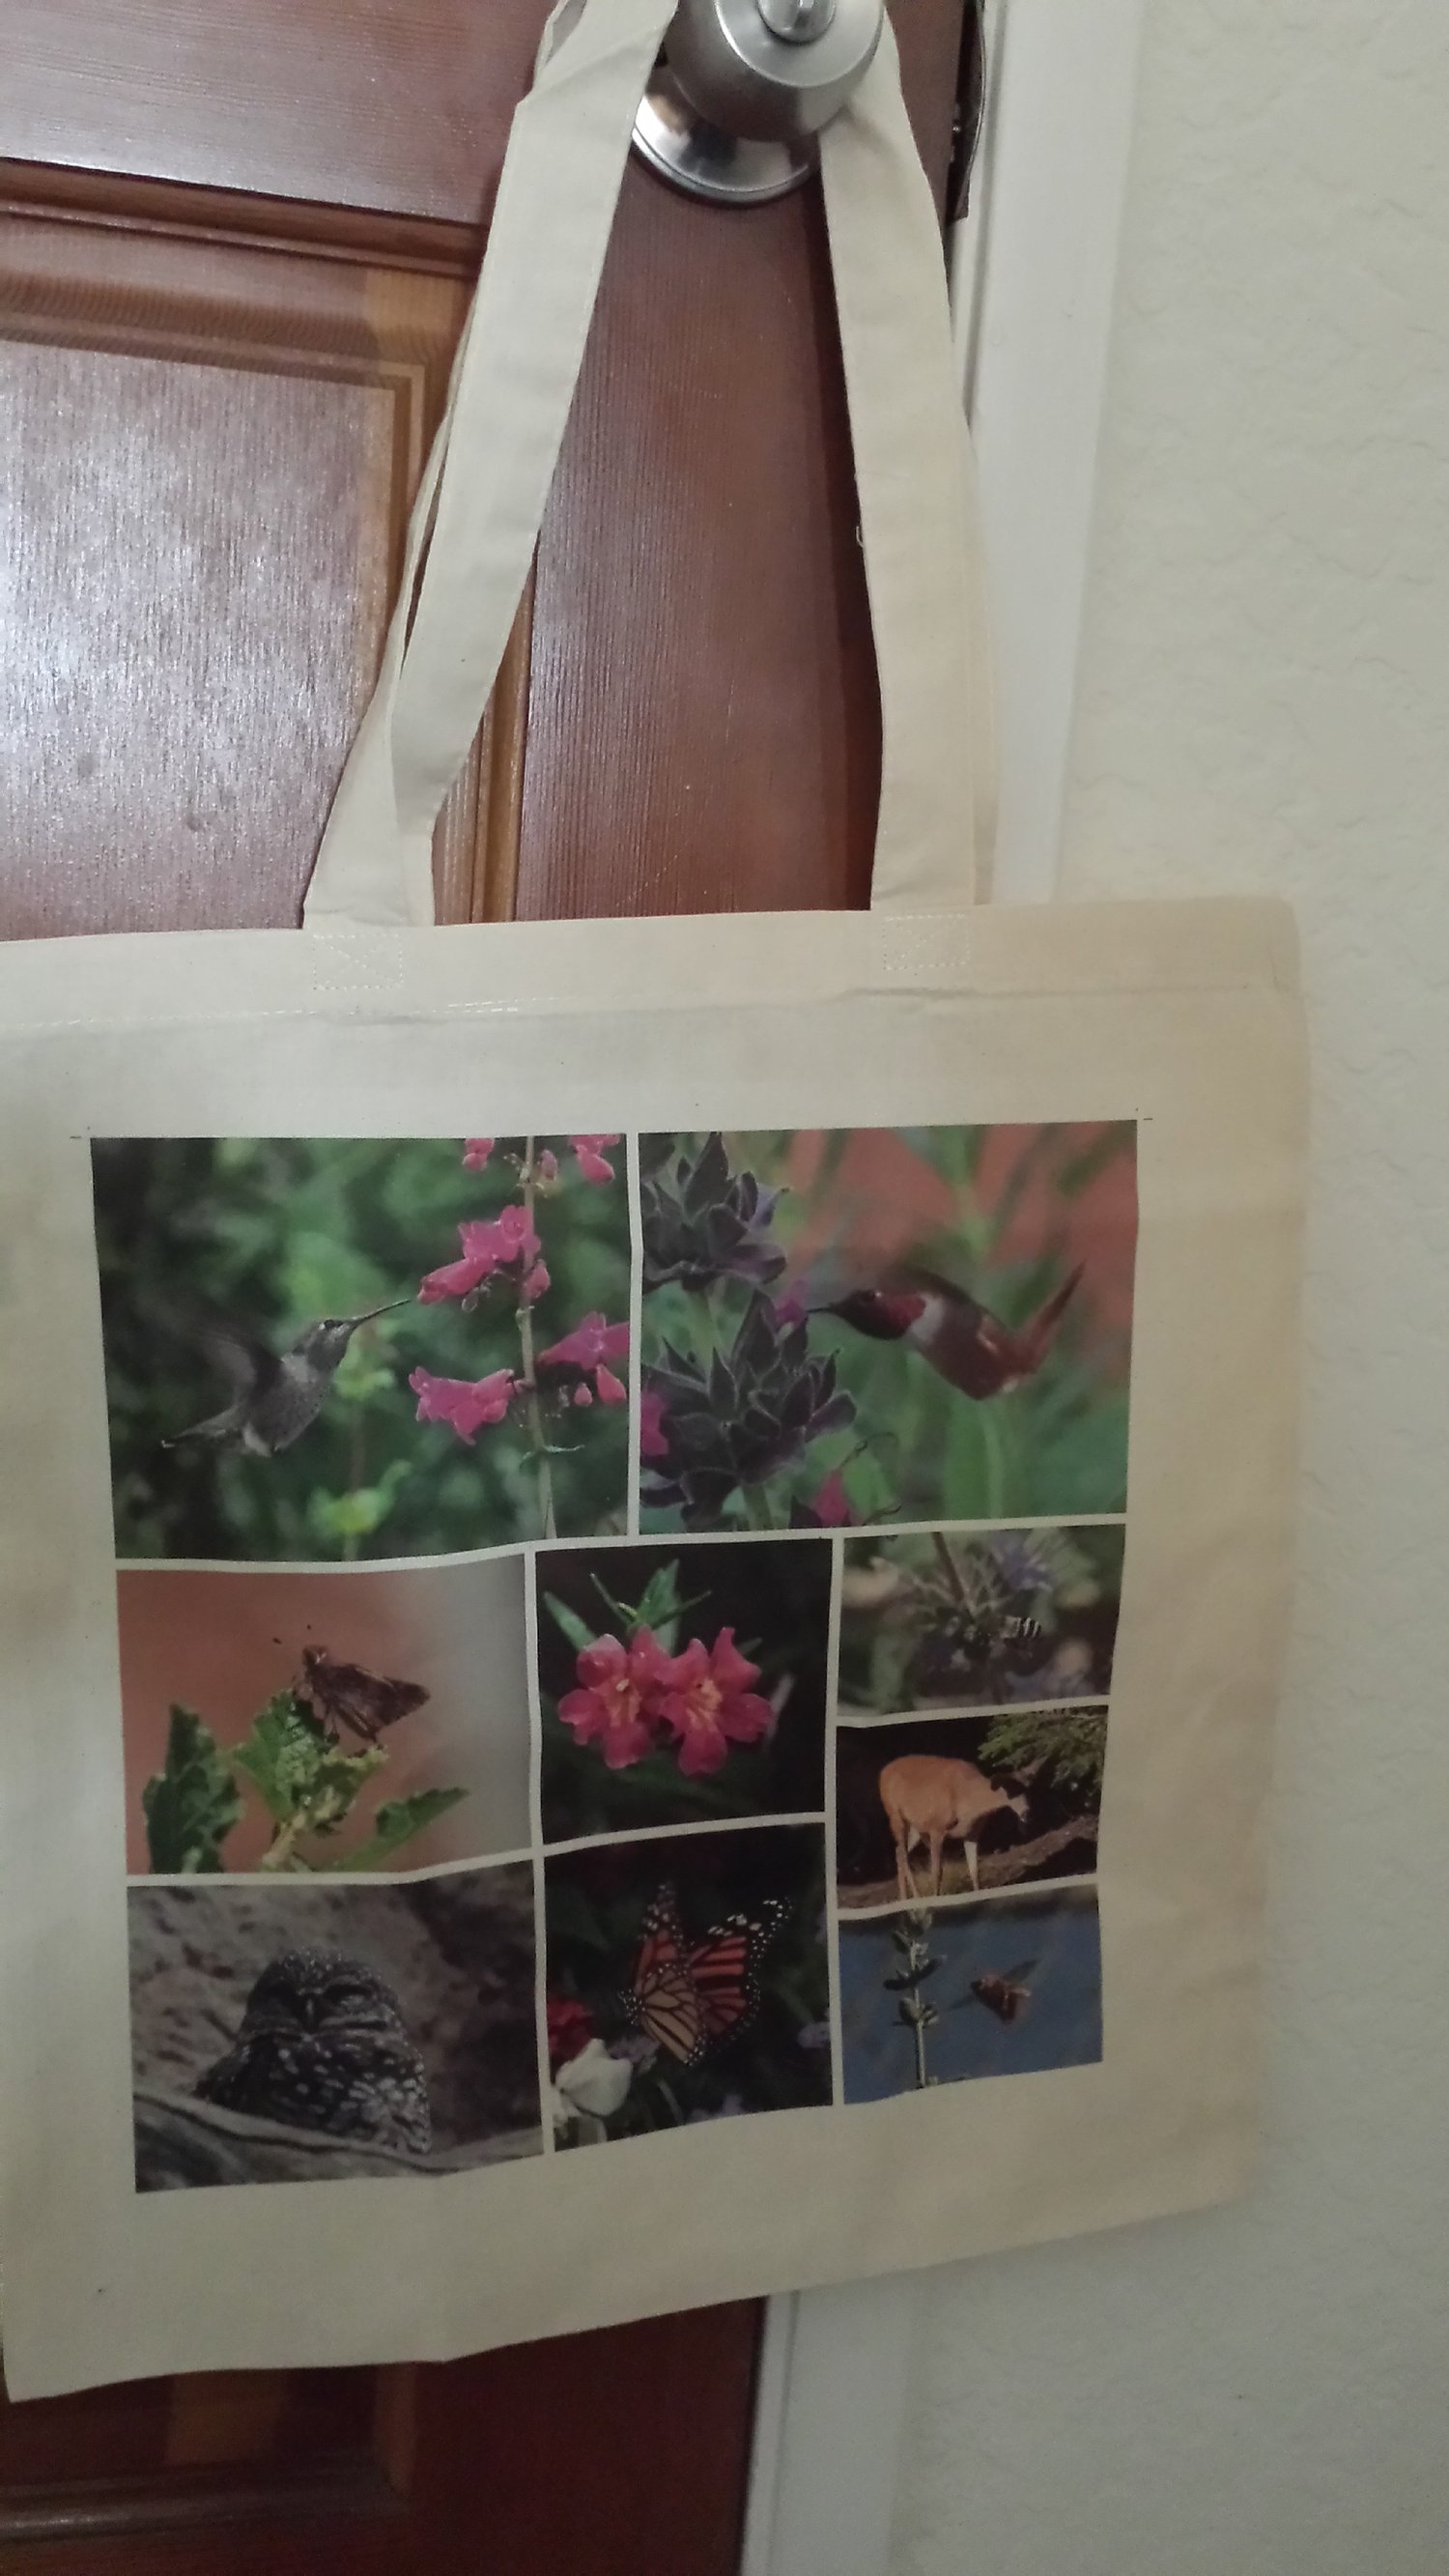 Image of Canvas Tote